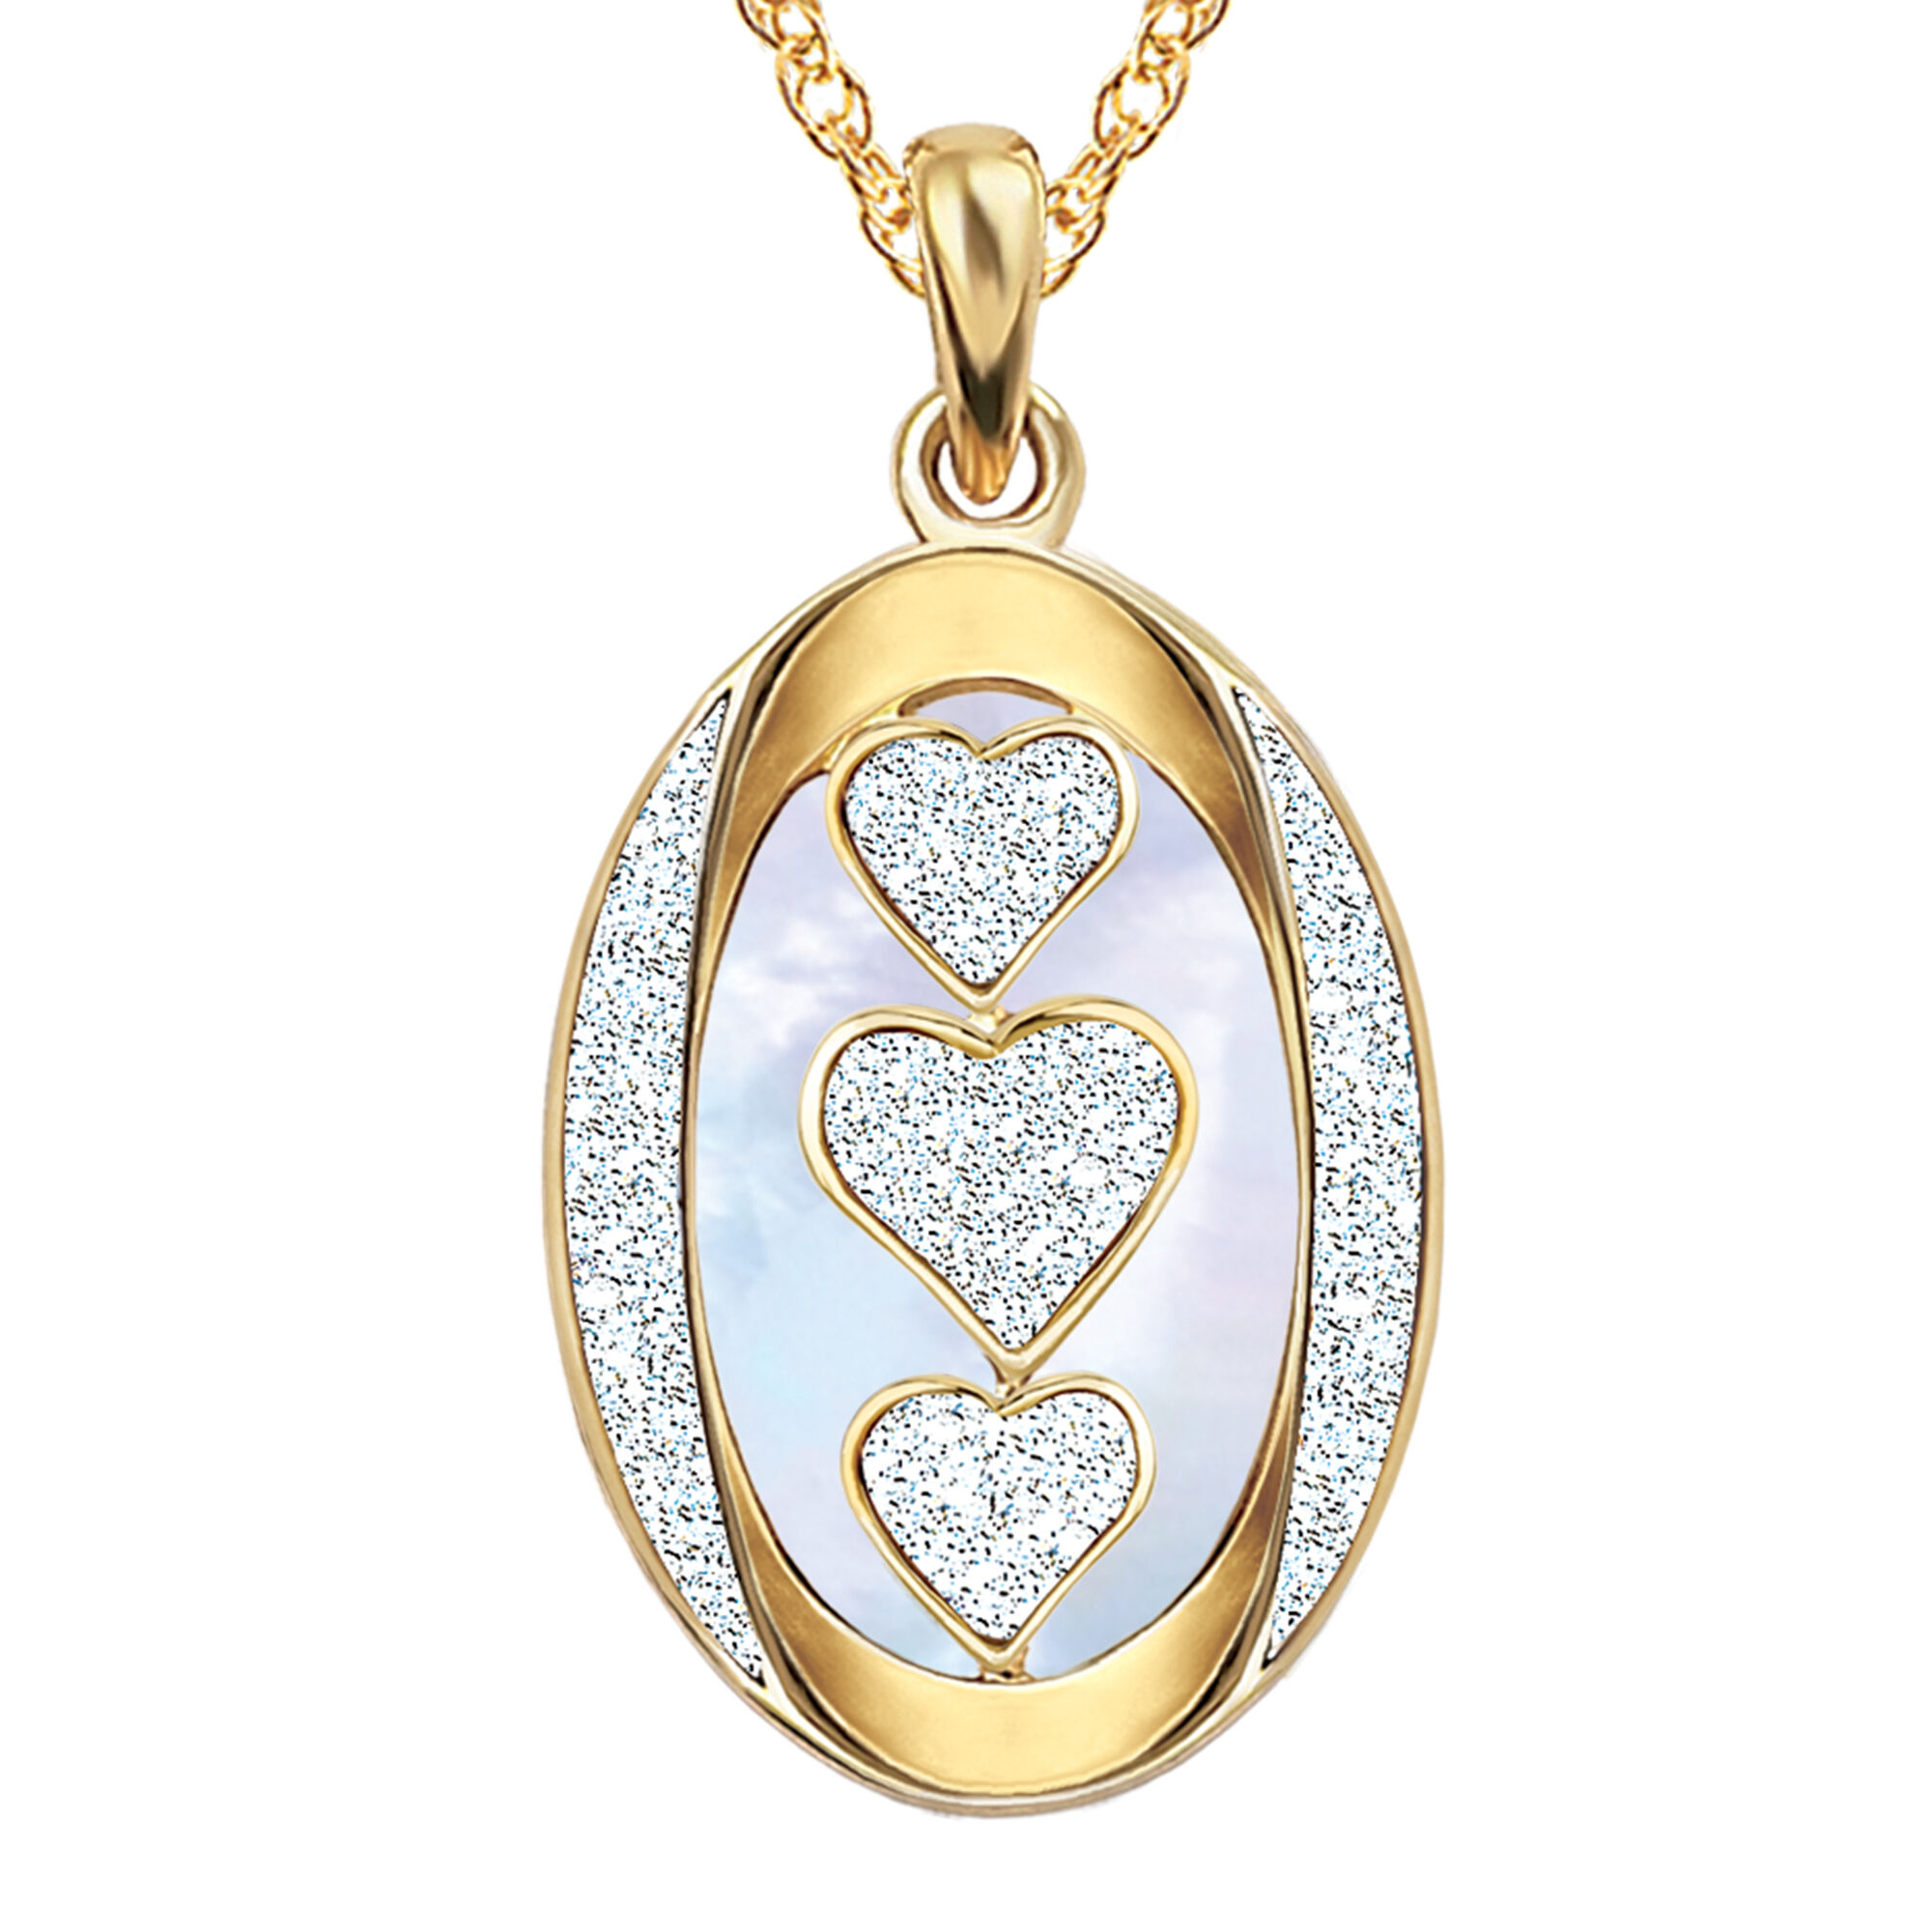 I Love You Personalized Diamond Pendant with FREE Matching Earrings 5238 0250 c front